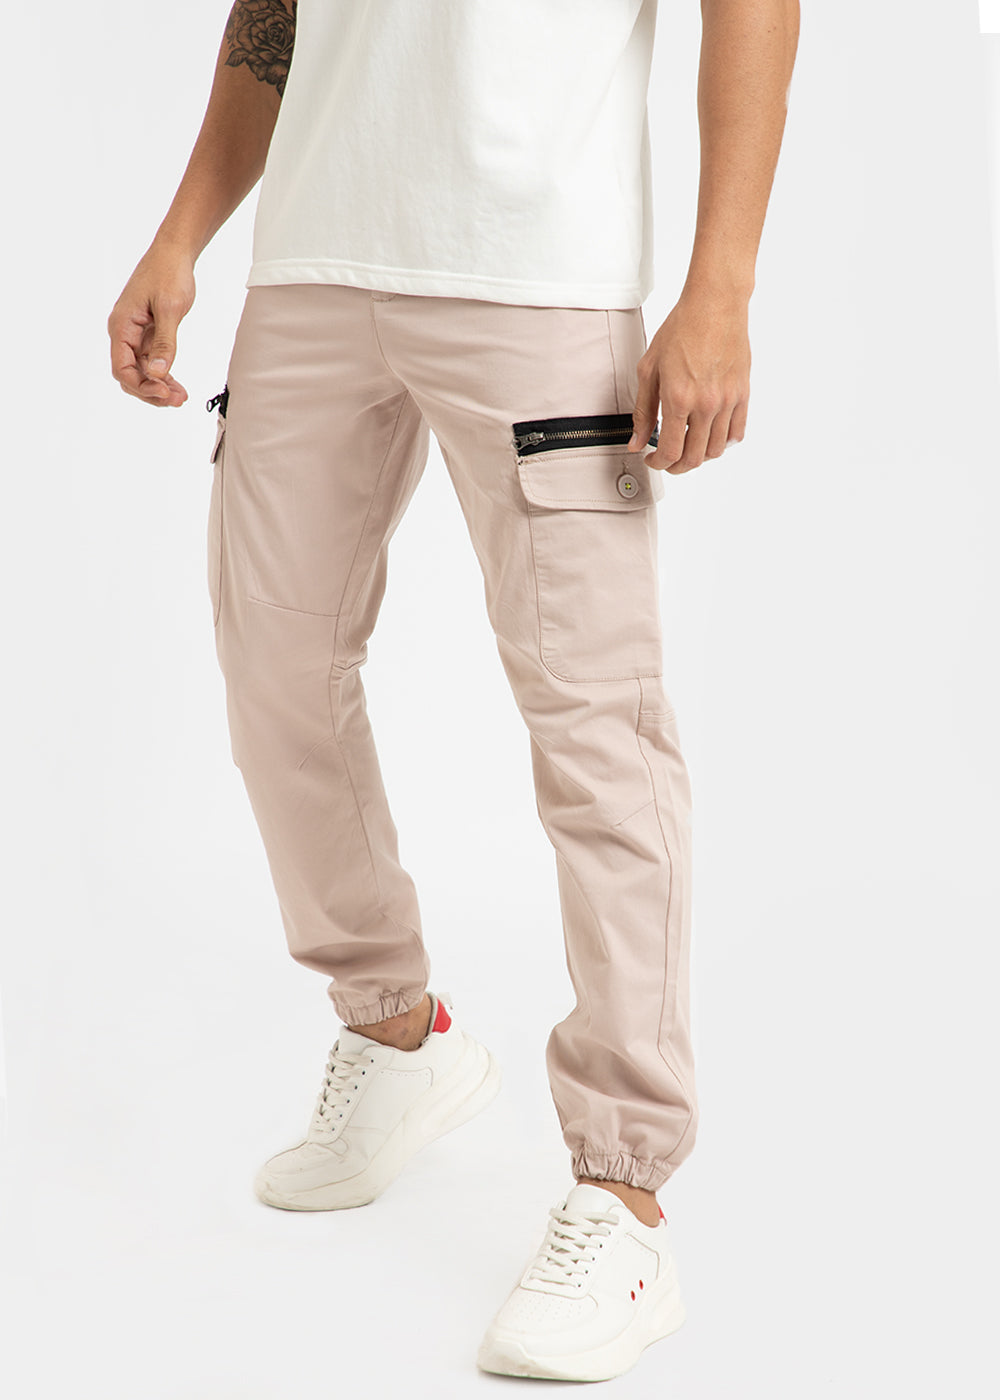 Cargos for Men - Buy Mens Cargo Pants Online at Best Prices in India